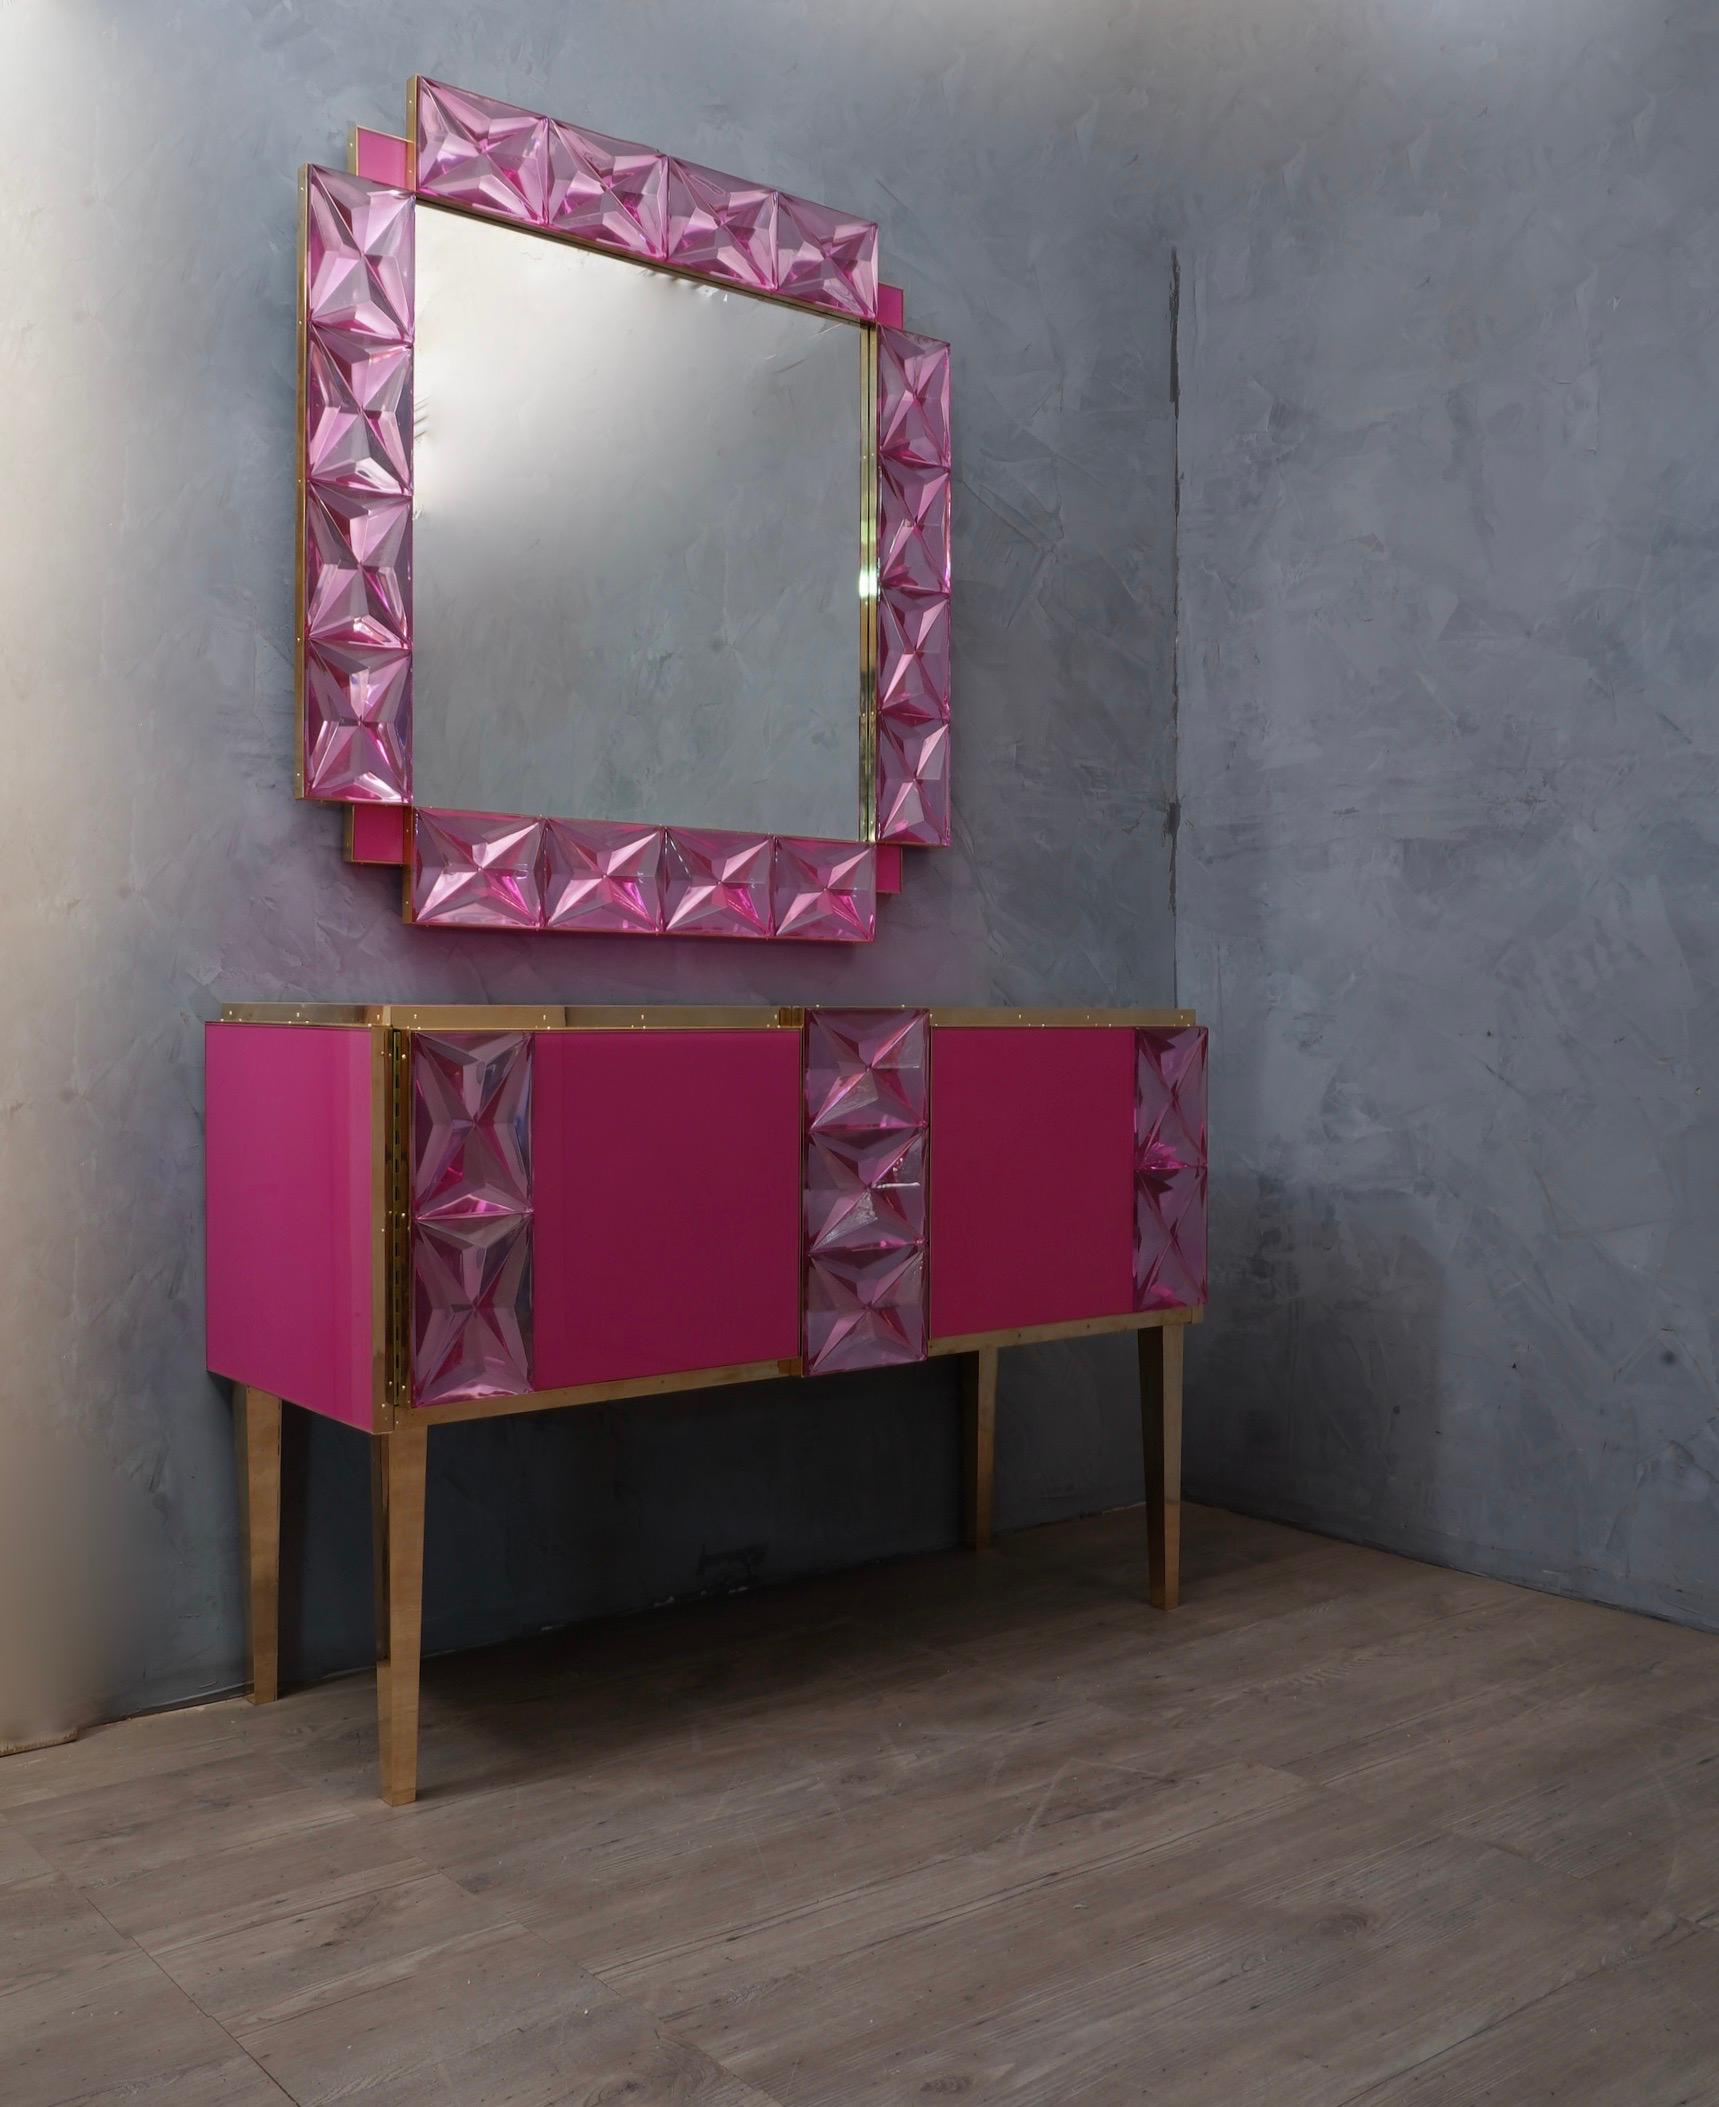 Stunning and unique sideboard all in pastel pink adorned with matching colored Murano glass bricks.

The sideboard has a wooden structure, then plated in pastel pink colored glass. Each side and each front has been edged with a brass finish. The